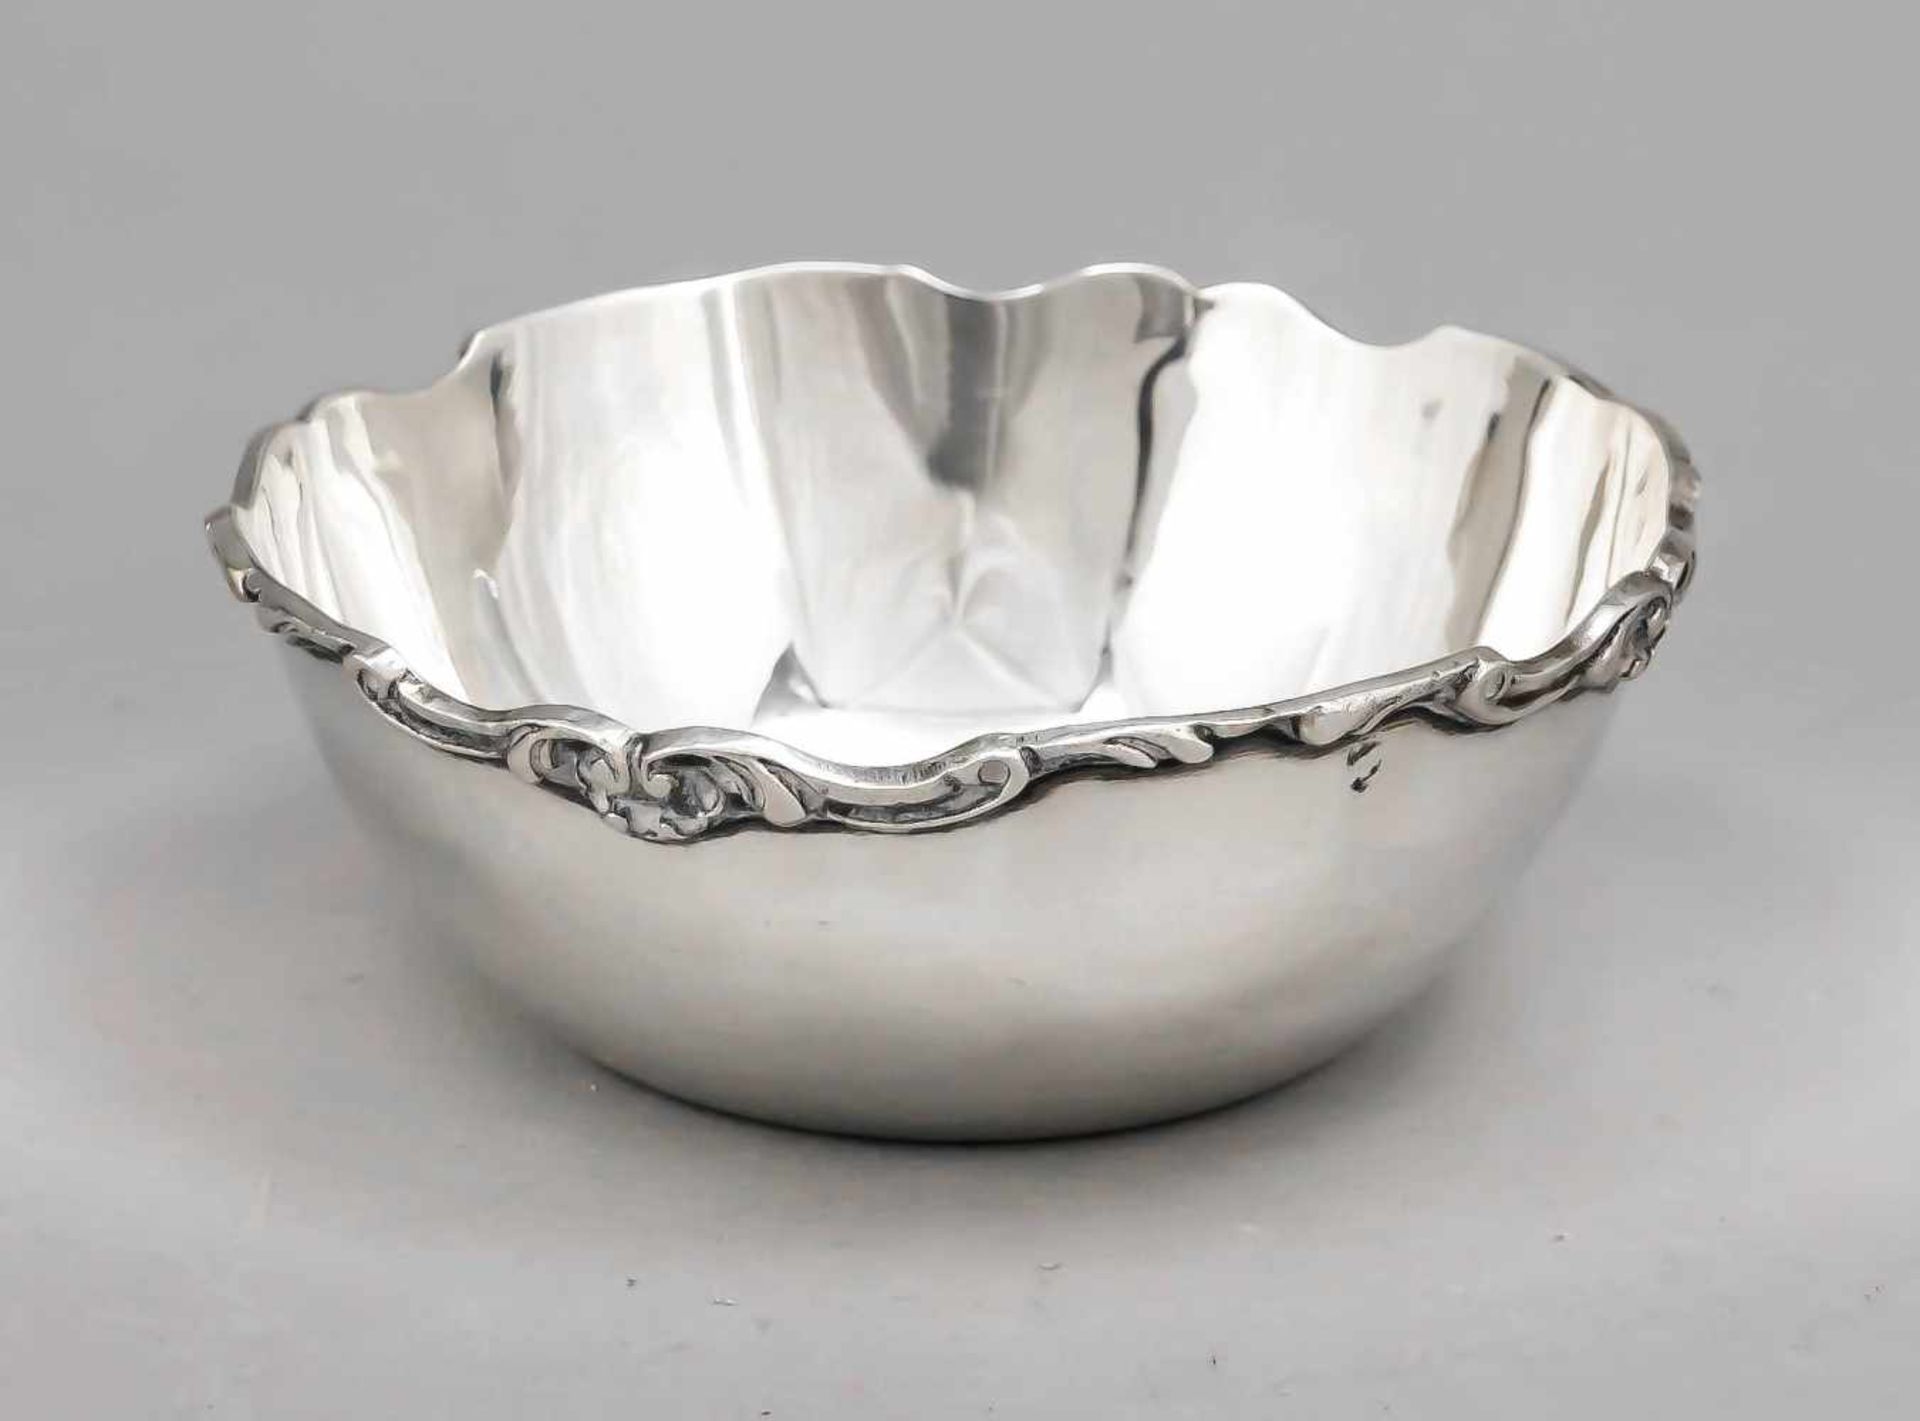 Round bowl, 20th century, Sterling silver 925/000, smooth shape, curved relief decorationrim, Ø 11.5